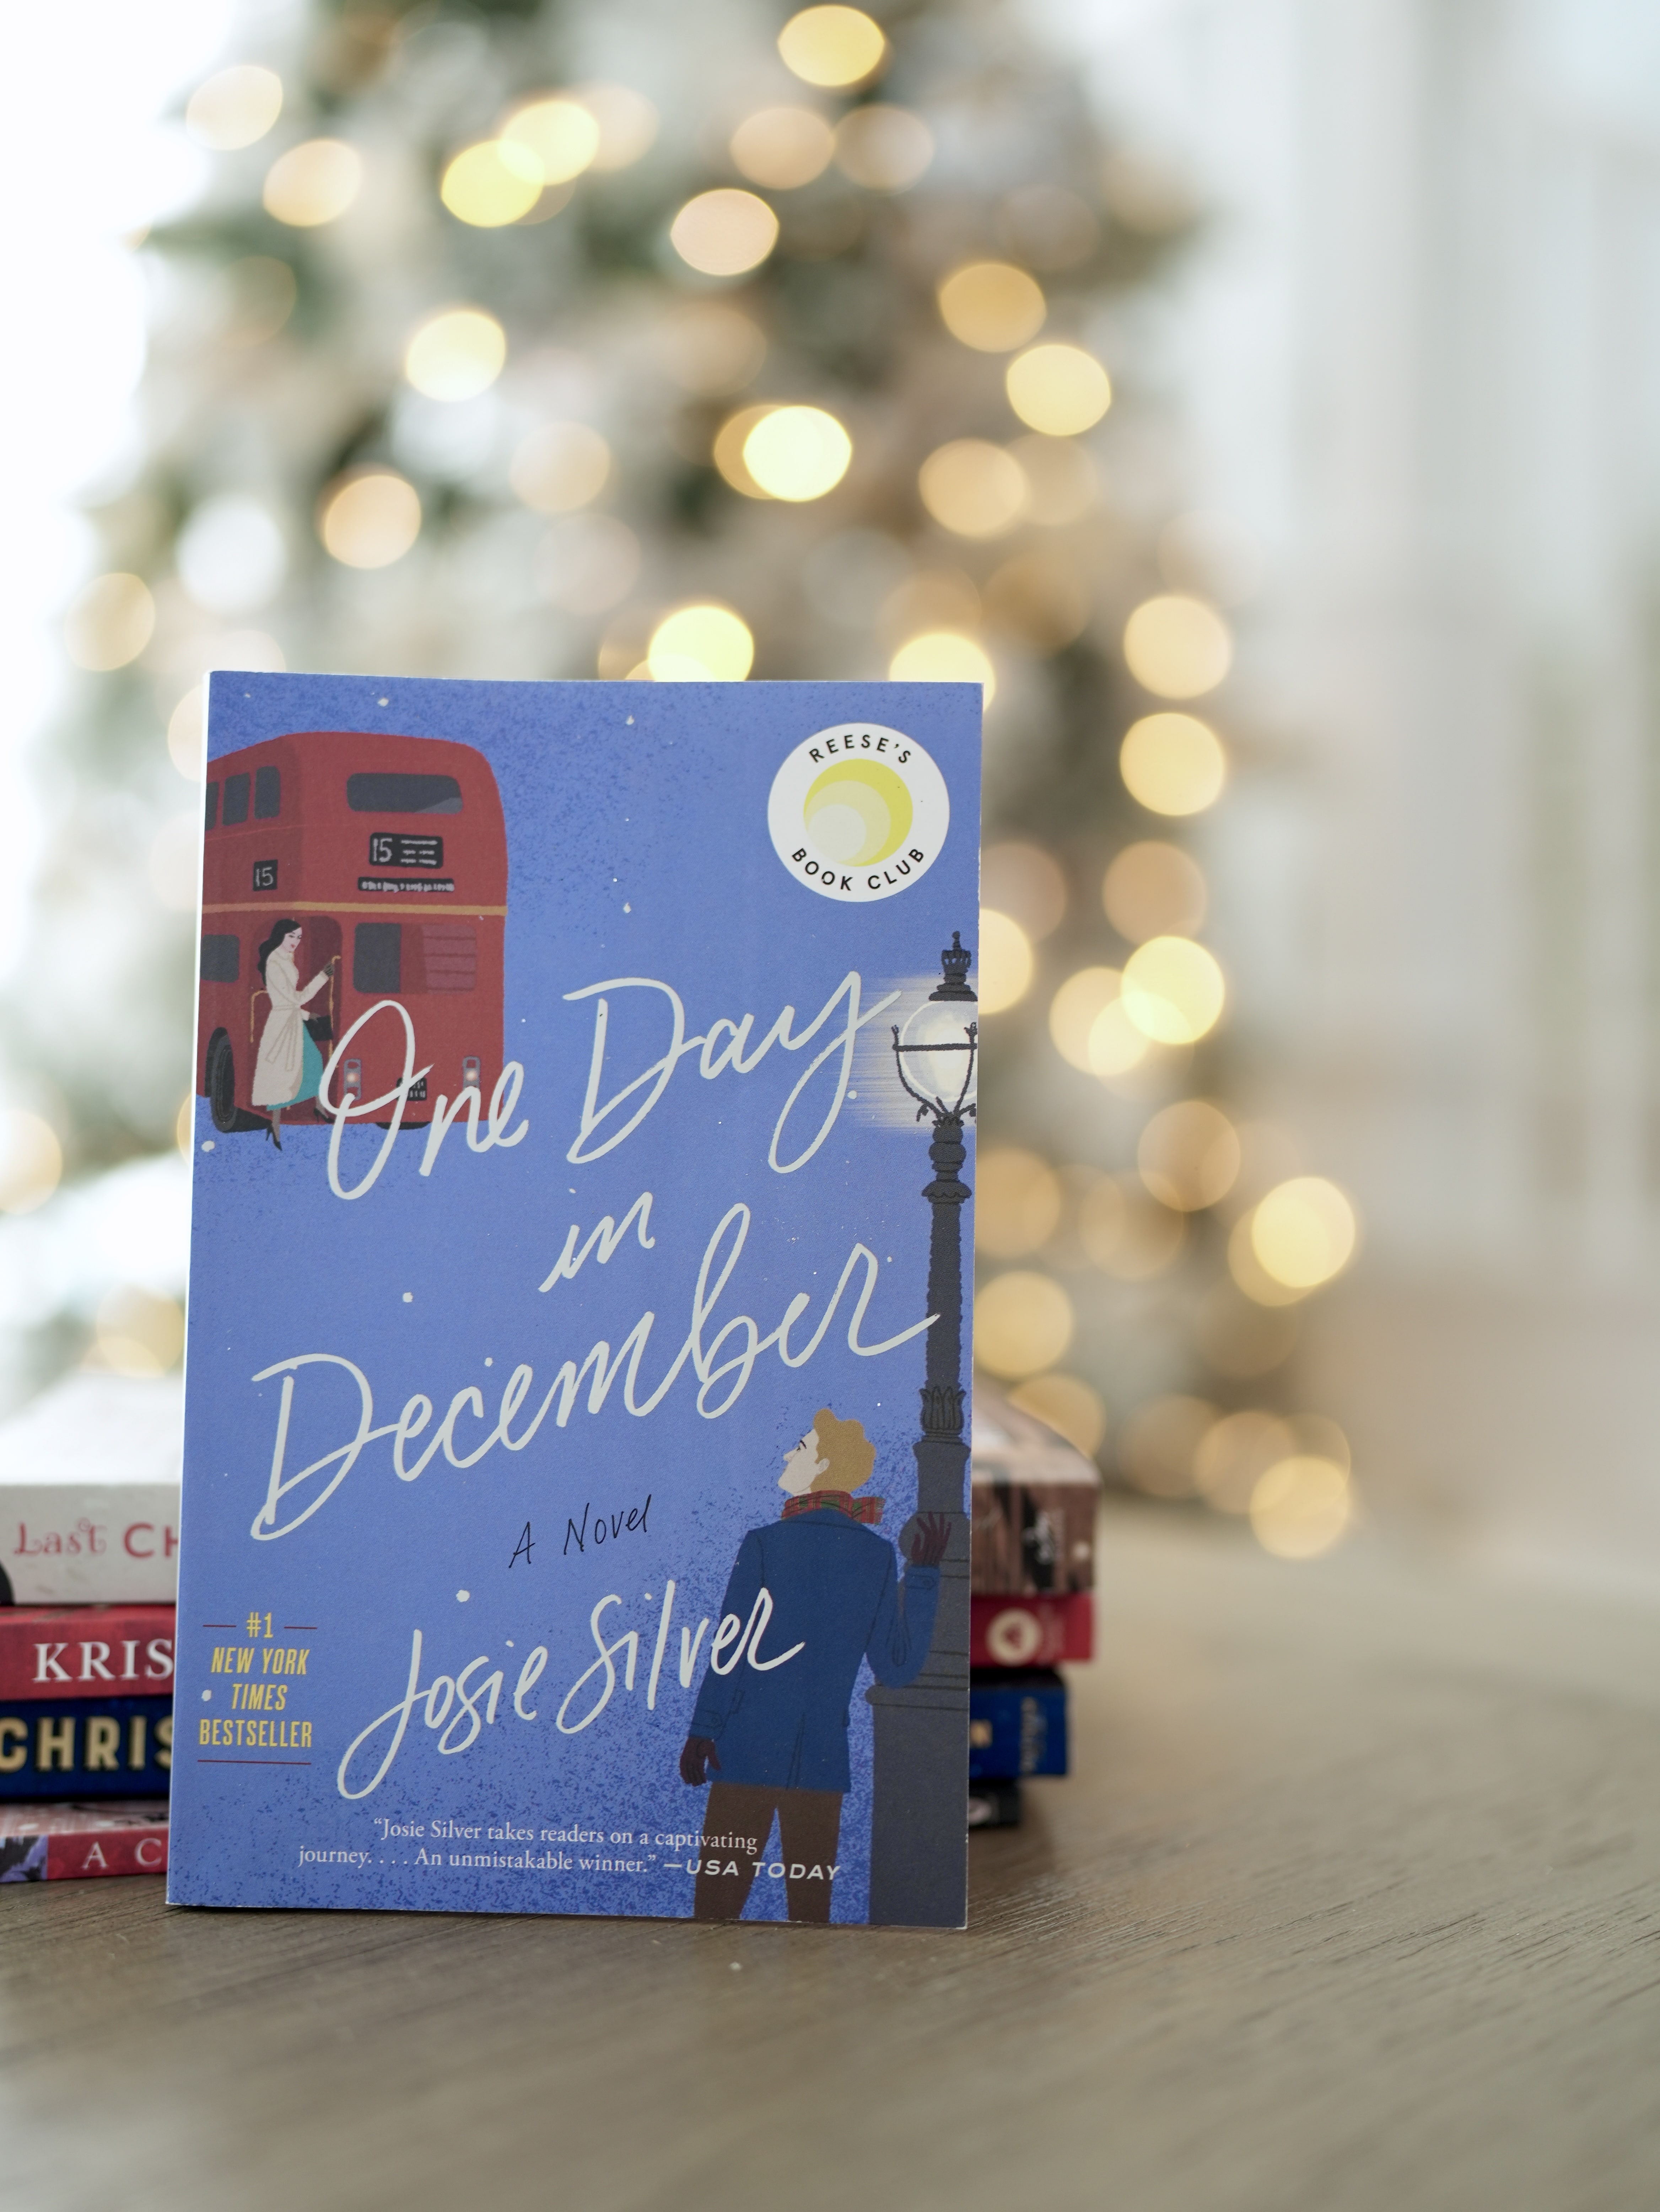 The book, titled One Day in December, by Josie Silver, stands behind a stack of books on a brown table. A lit up Christmas tree is in the background.